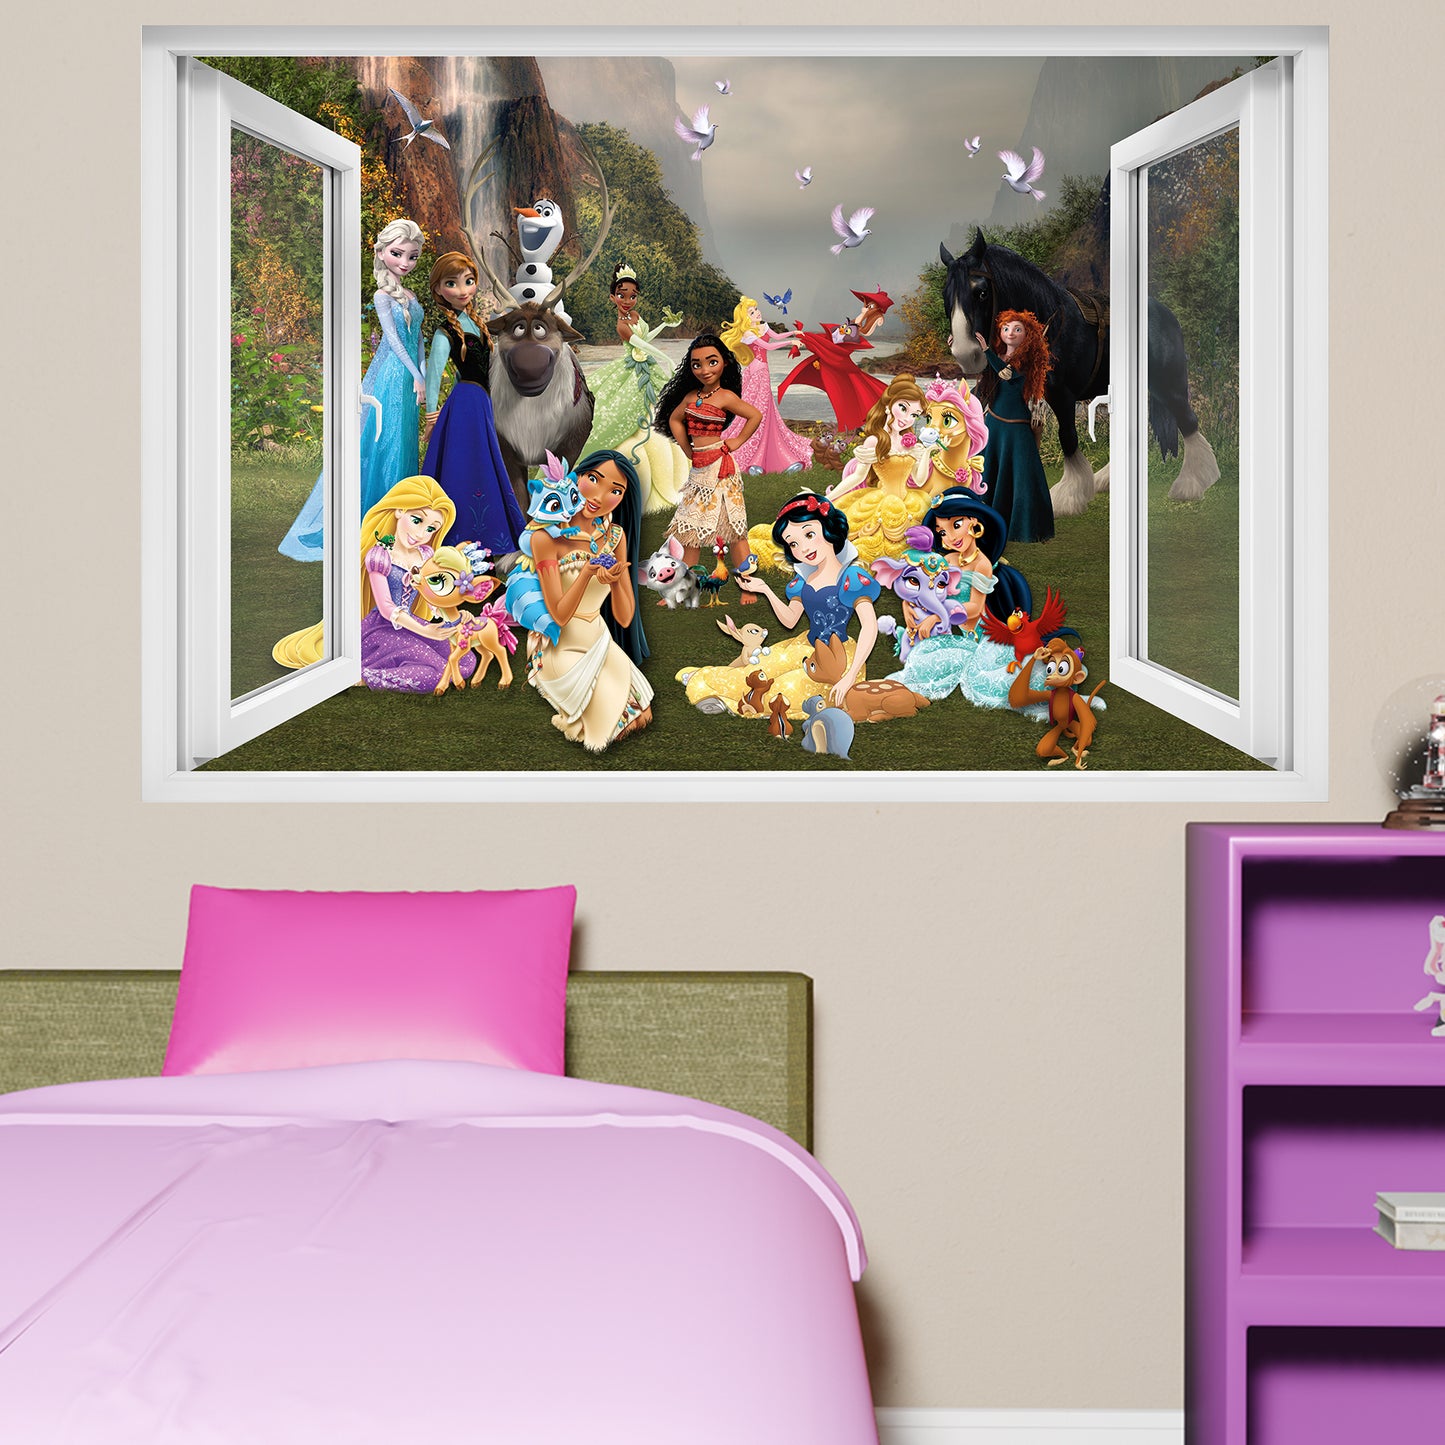 All Princess Characters Pets and Fairies Wall Sticker Art Poster Decal Mural  Nursery Girls Bedroom Decor 1087